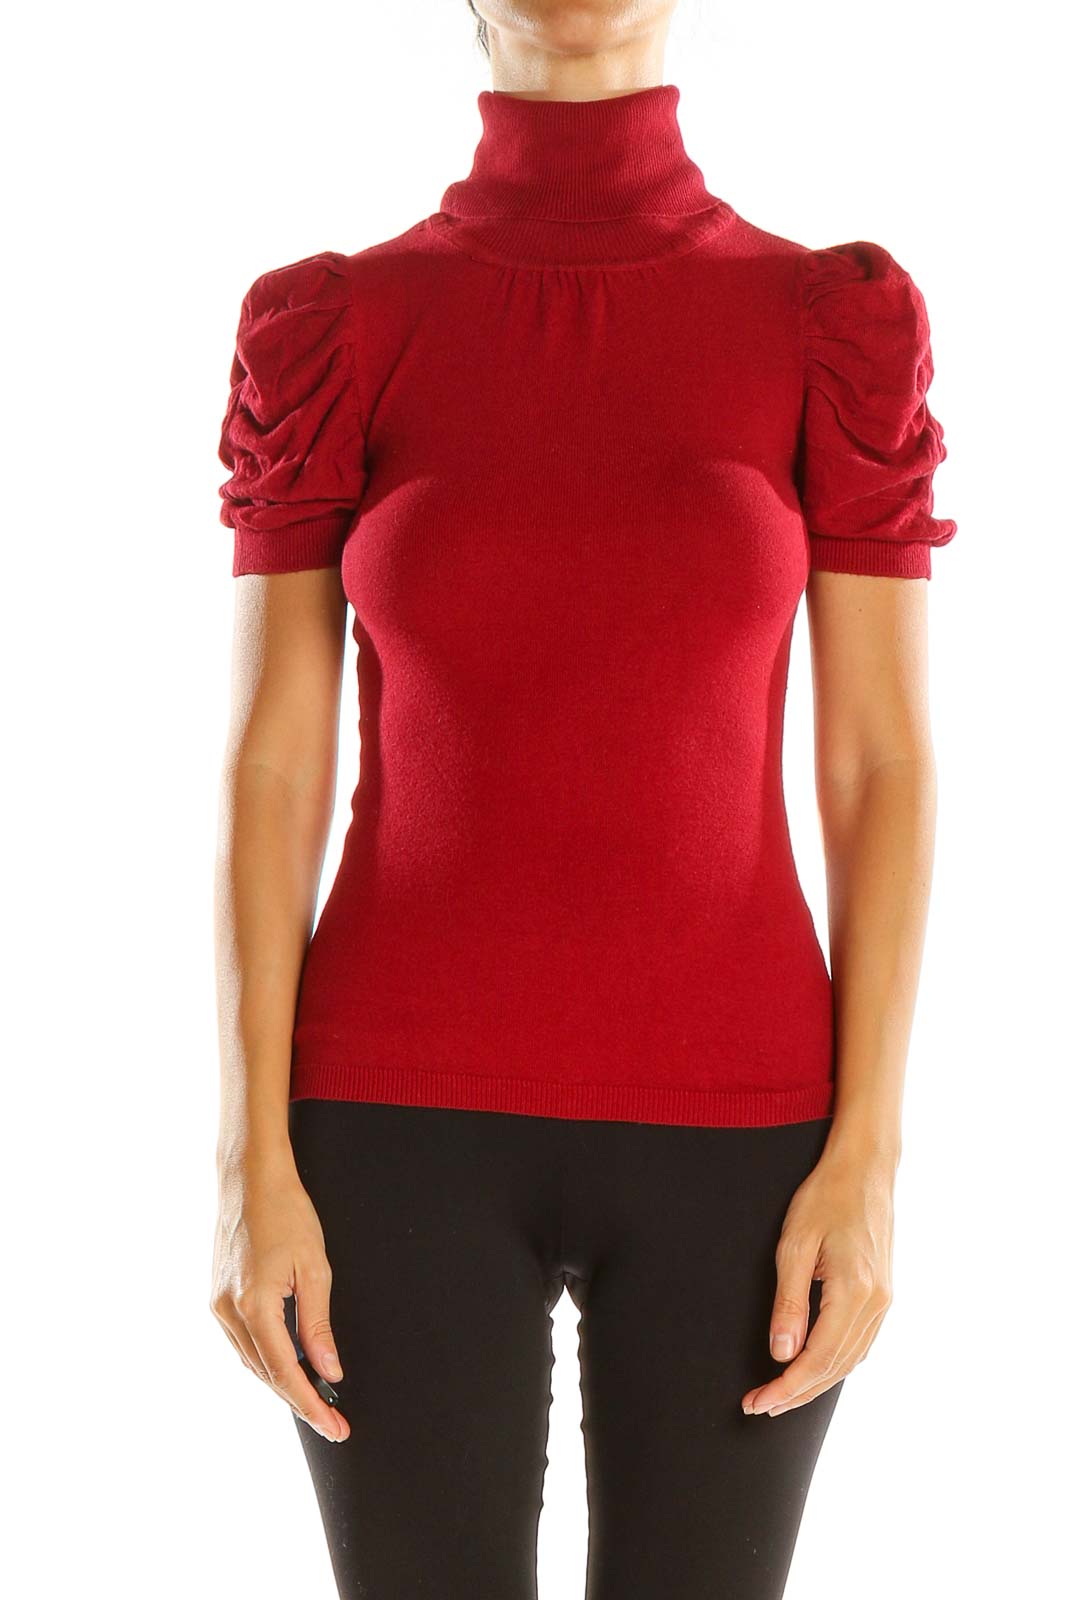 Red Retro Top Front